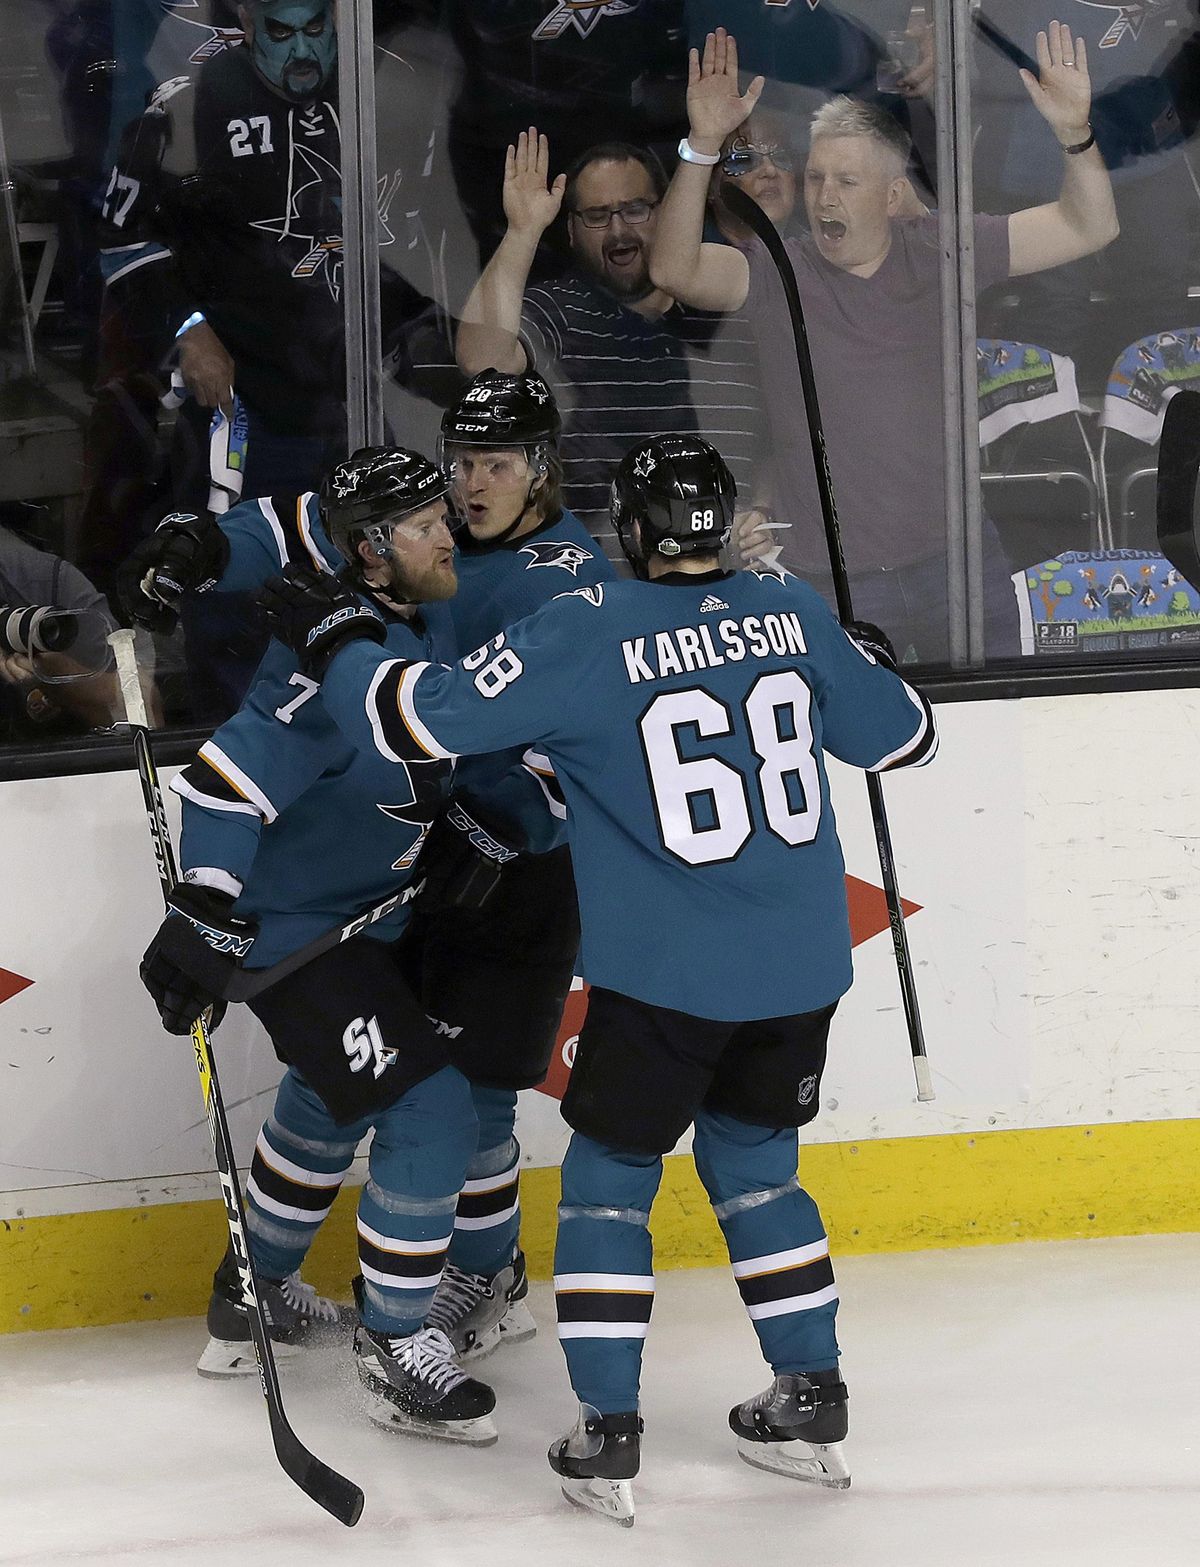 San Jose Sharks left wing Marcus Sorensen, center, is congratulated by defenseman Paul Martin (7) and right wing Melker Karlsson (68), from Sweden, after scoring a goal against the Anaheim Ducks during the first period of Game 4 of an NHL hockey first-round playoff series in San Jose, Calif., Wednesday, April 18, 2018. (Jeff Chiu / Associated Press)